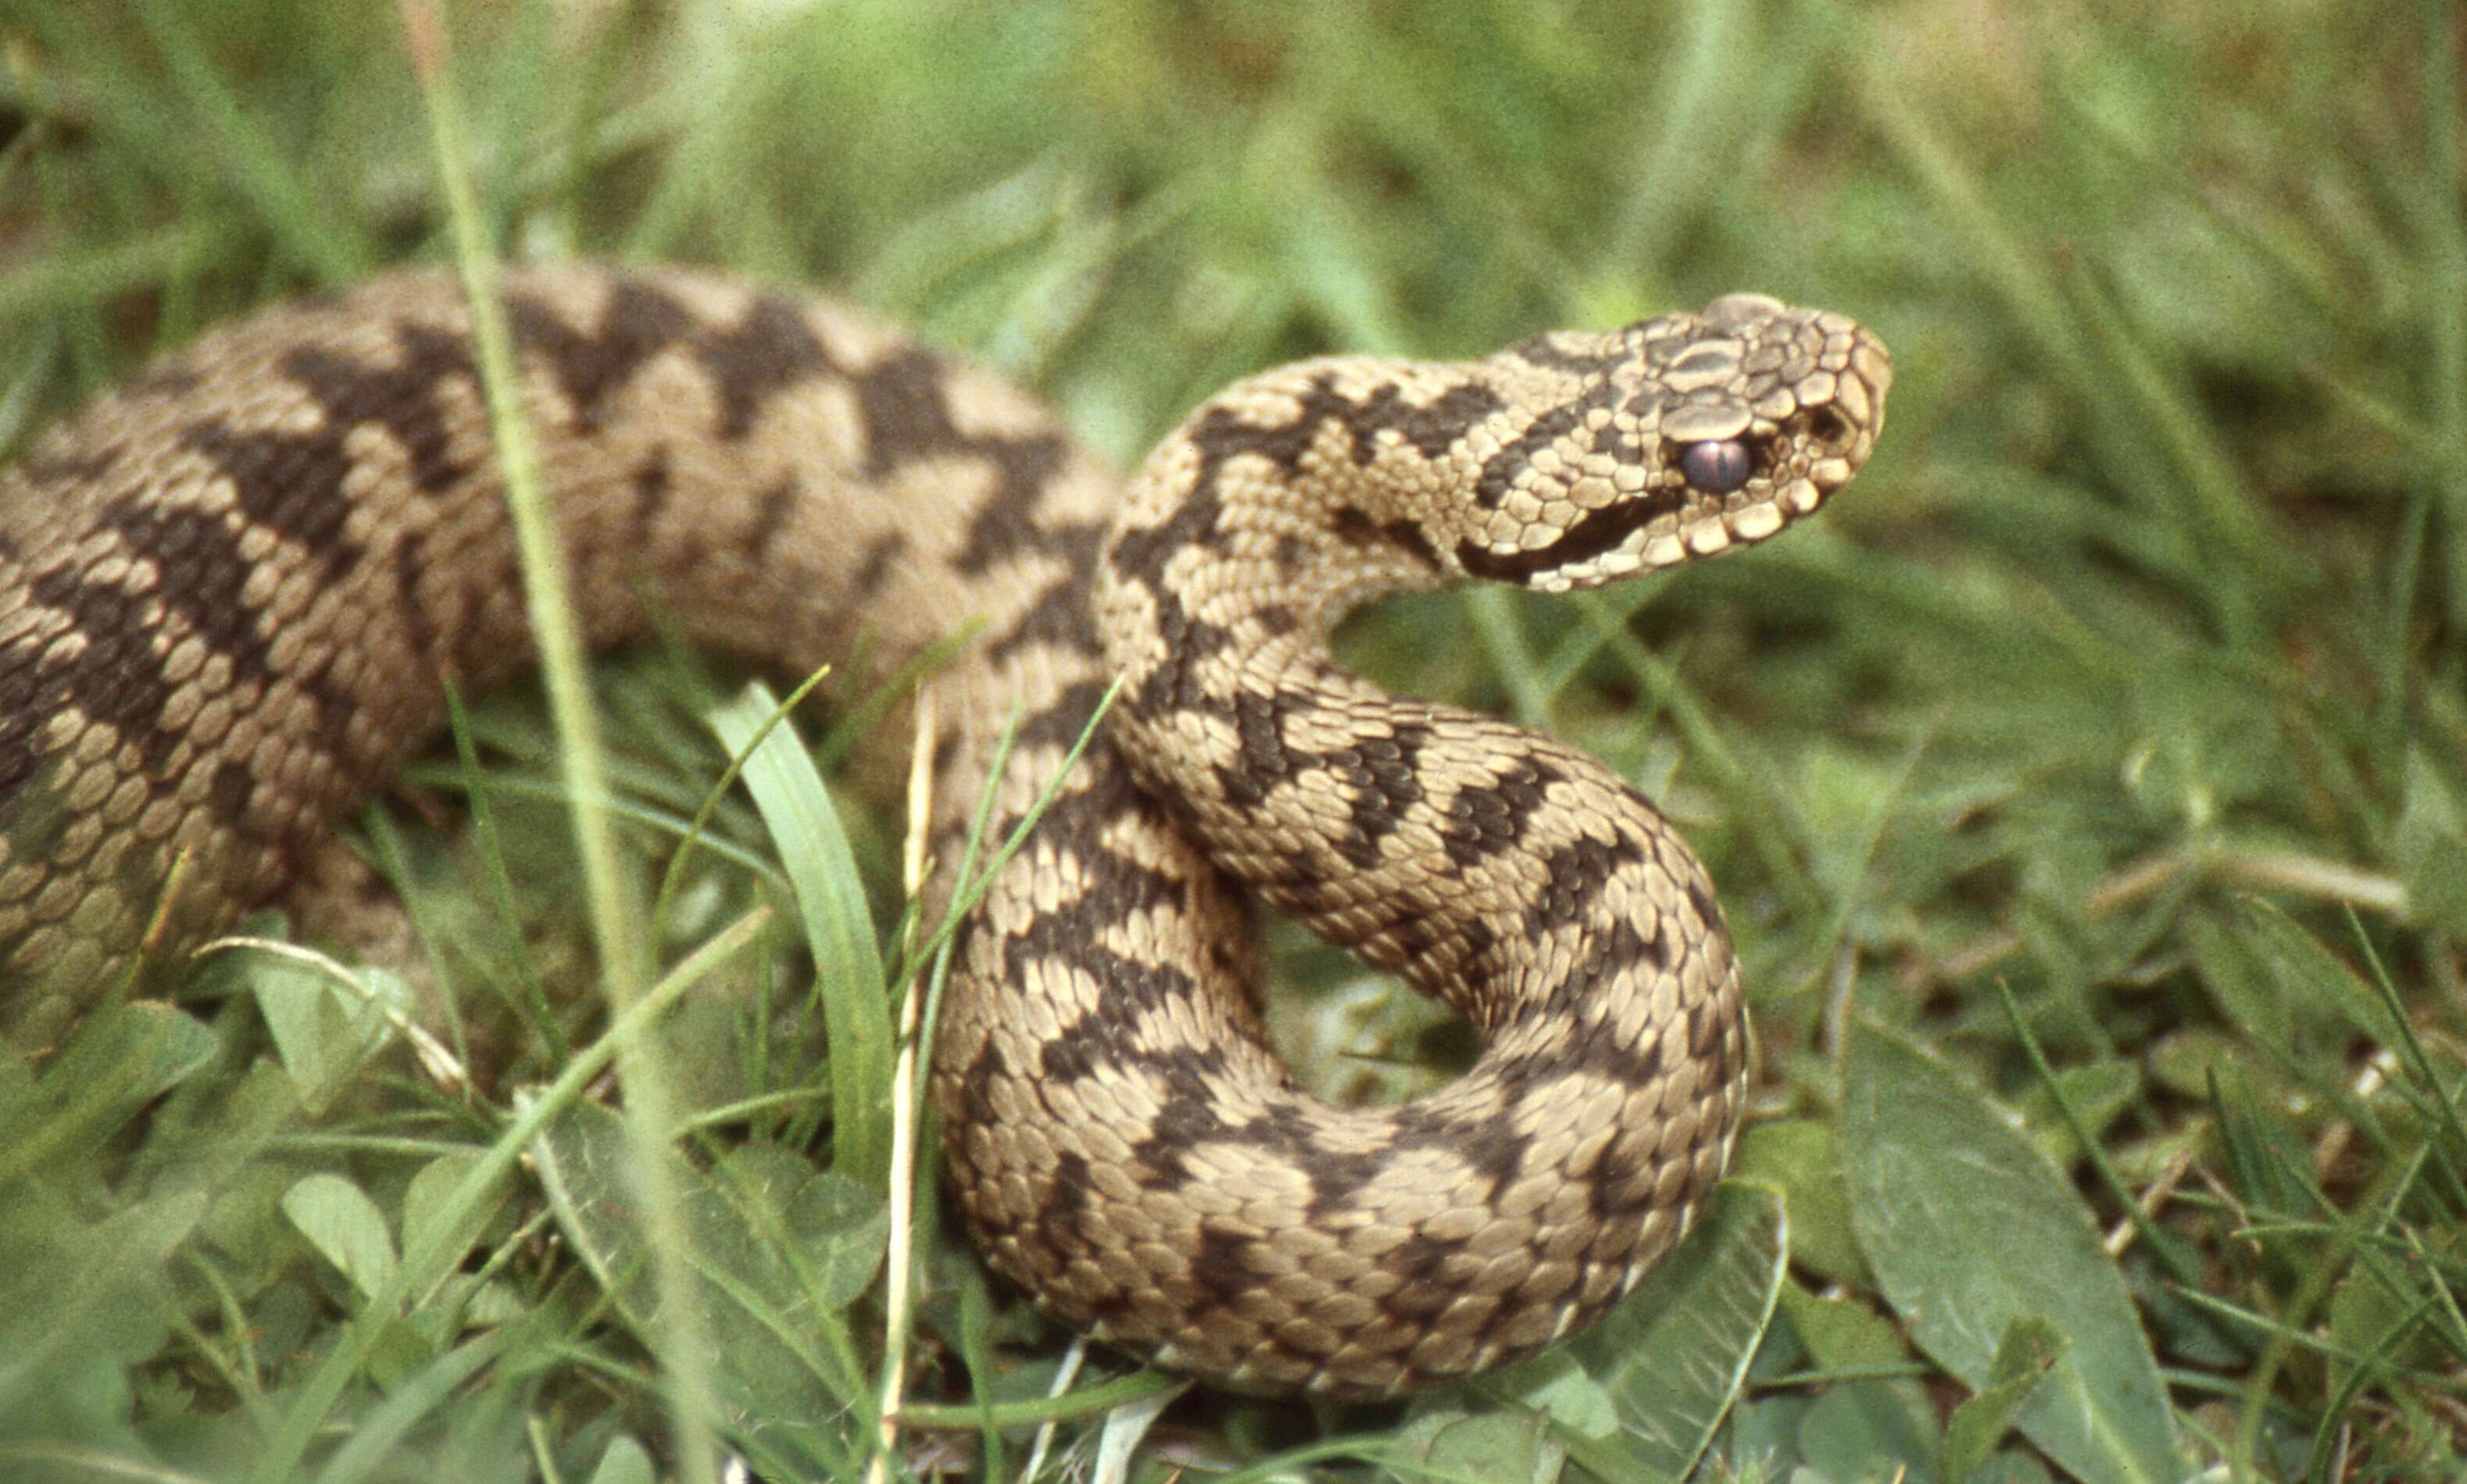 Image of Vipers